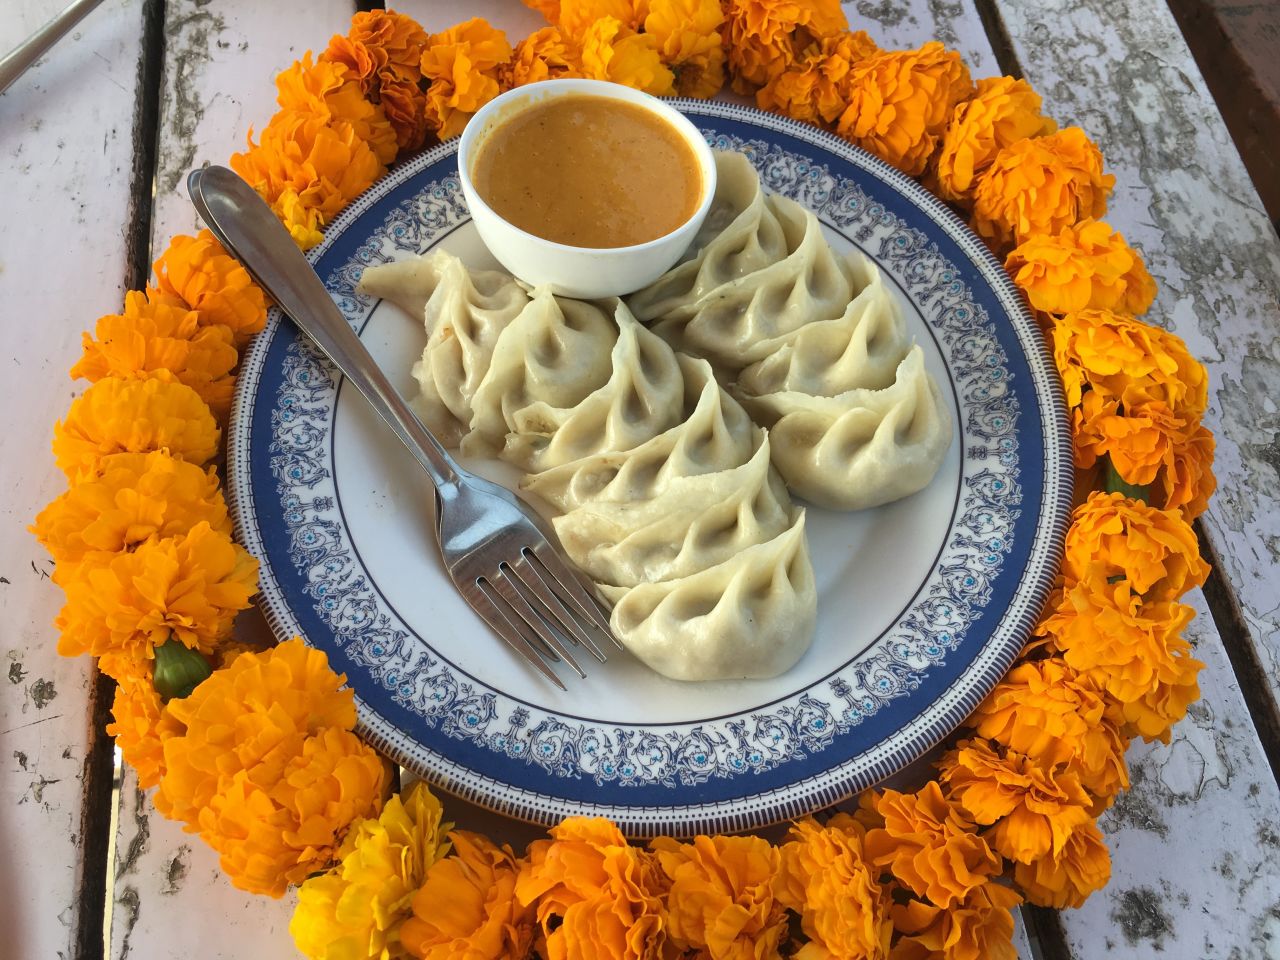 Steamed dumplings are one of Nepal's most famous offerings. These half-fried, half-steamed momos contain buffalo meat.